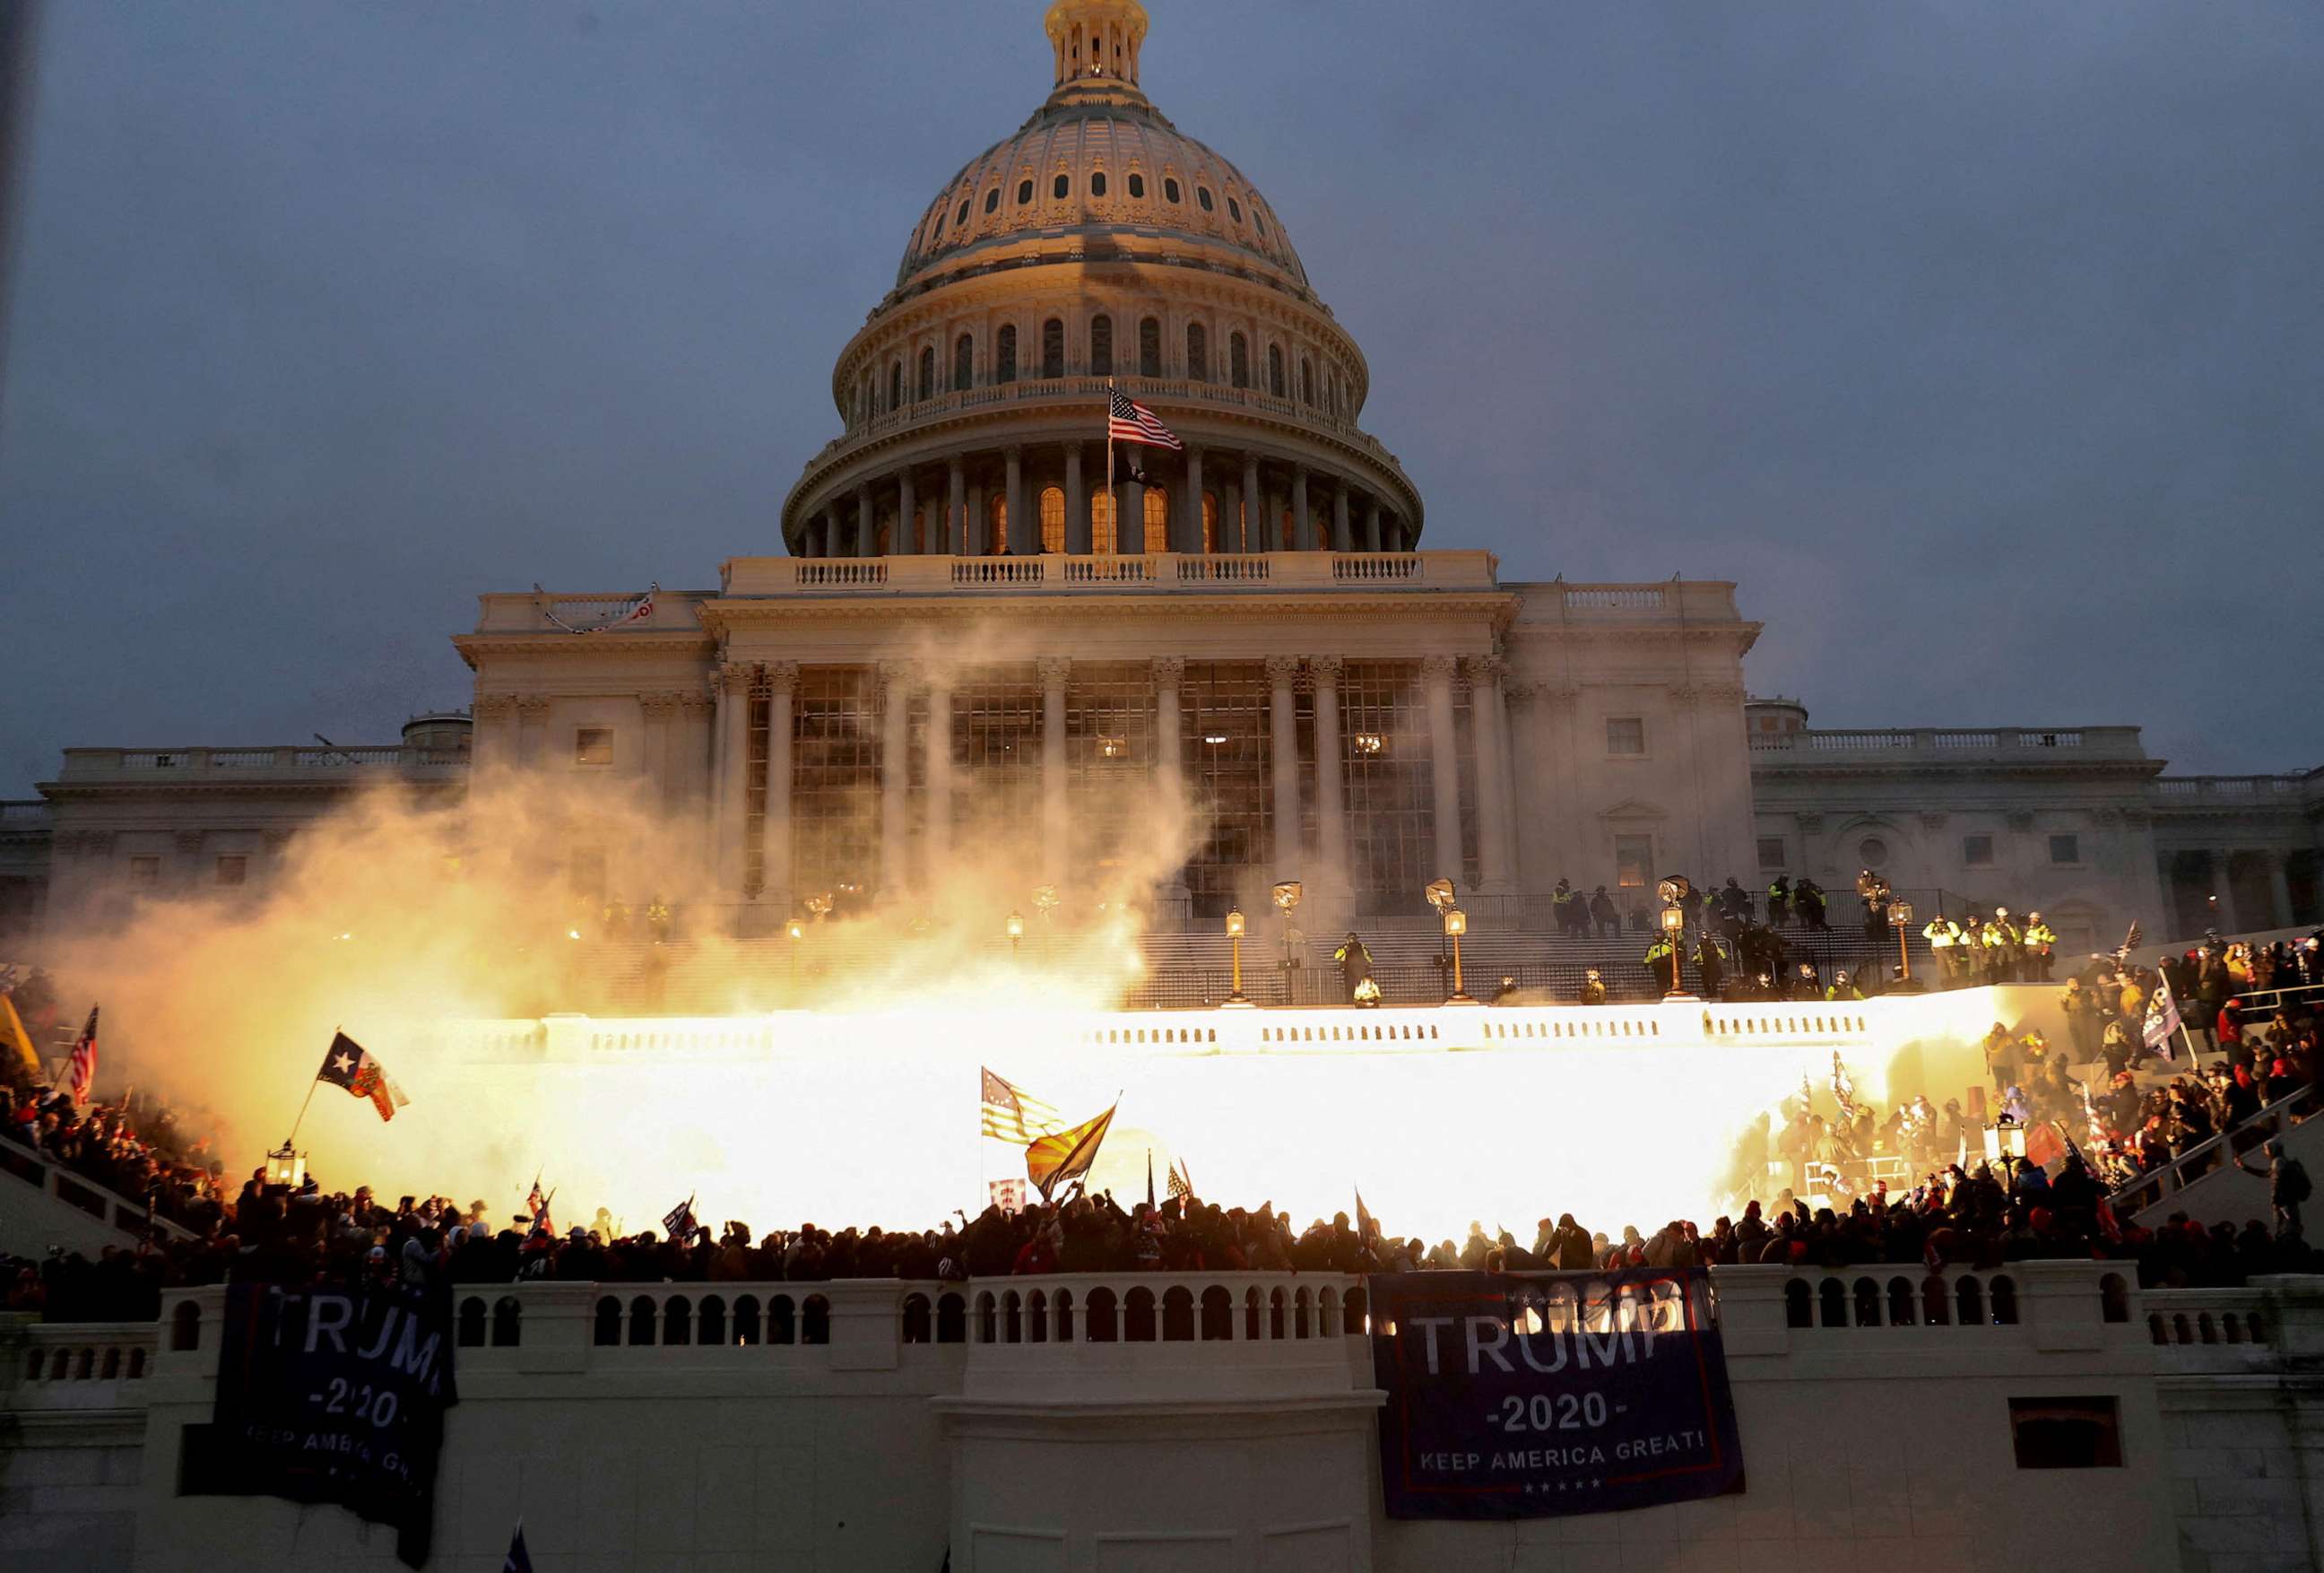 PHOTO: FILE - An explosion caused by a police munition is seen while supporters of U.S. President Donald Trump gather in front of the U.S. Capitol Building in Washington, Jan. 6, 2021.